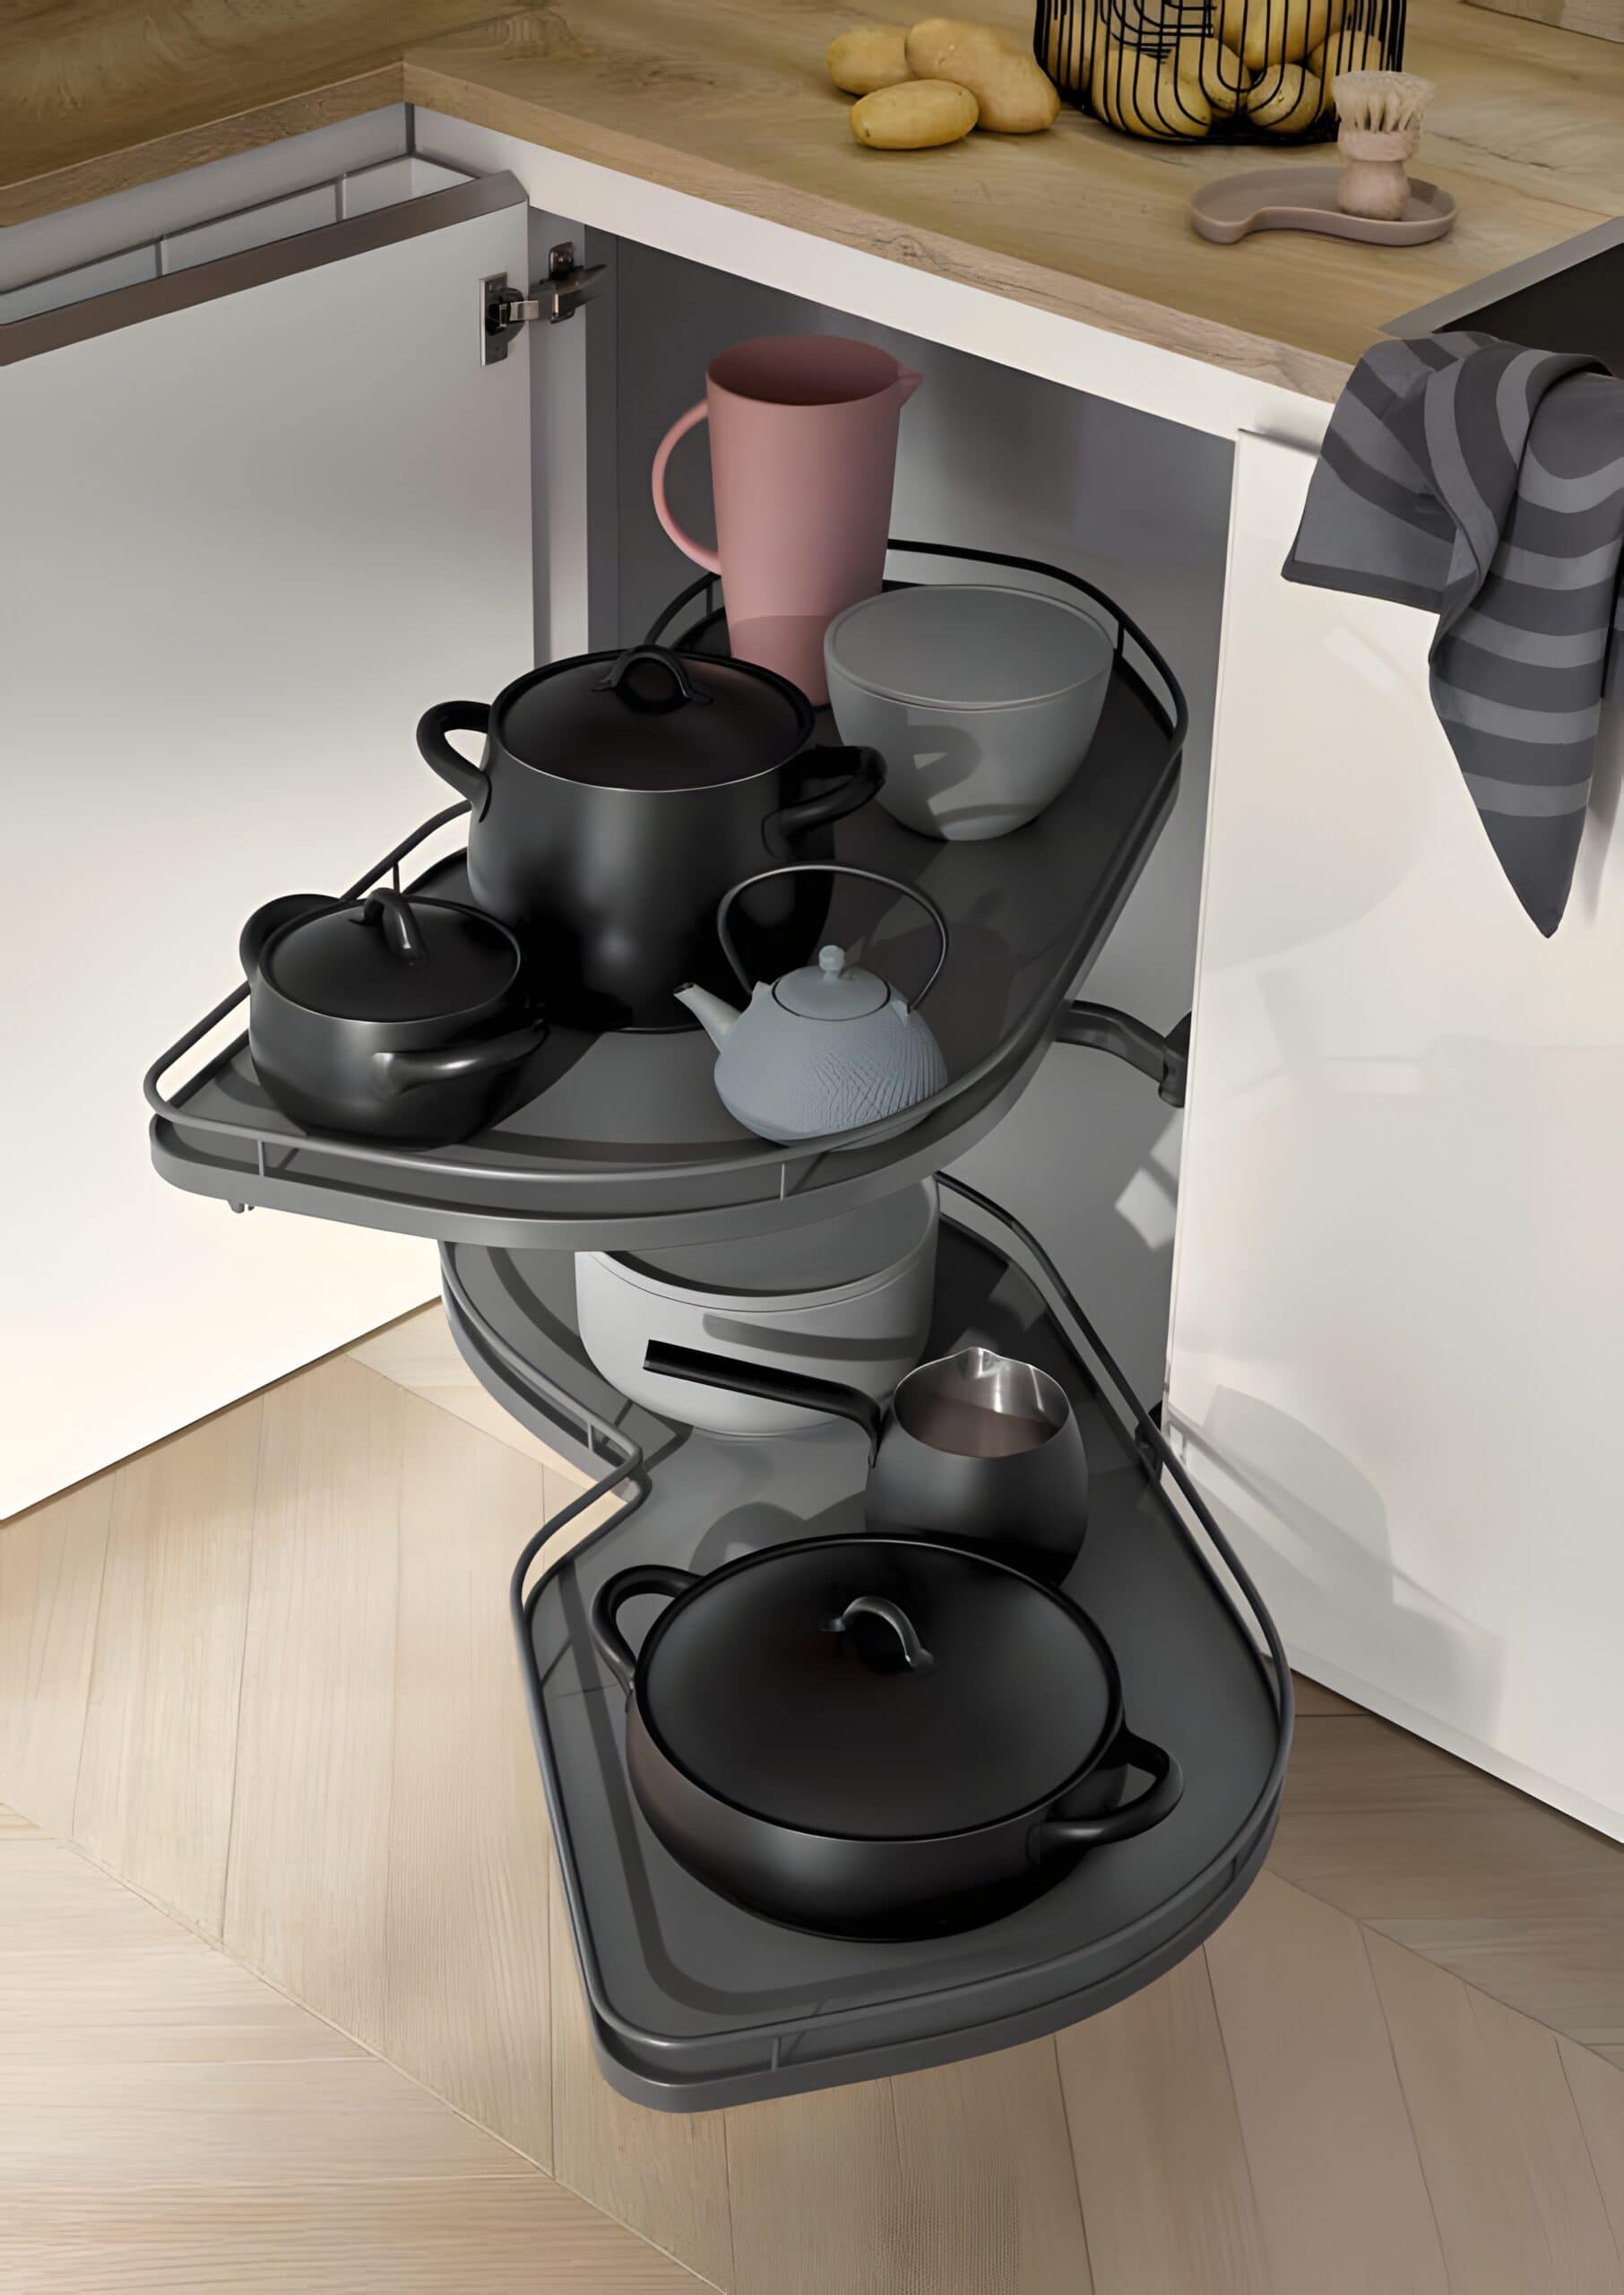 A corner kitchen cabinet with pull-out shelves featuring various black and gray pots, bowls, and a pink jug. The cabinet is open, displaying the organized kitchenware, offering eco-friendly organization ideas for kitchen cabinets.